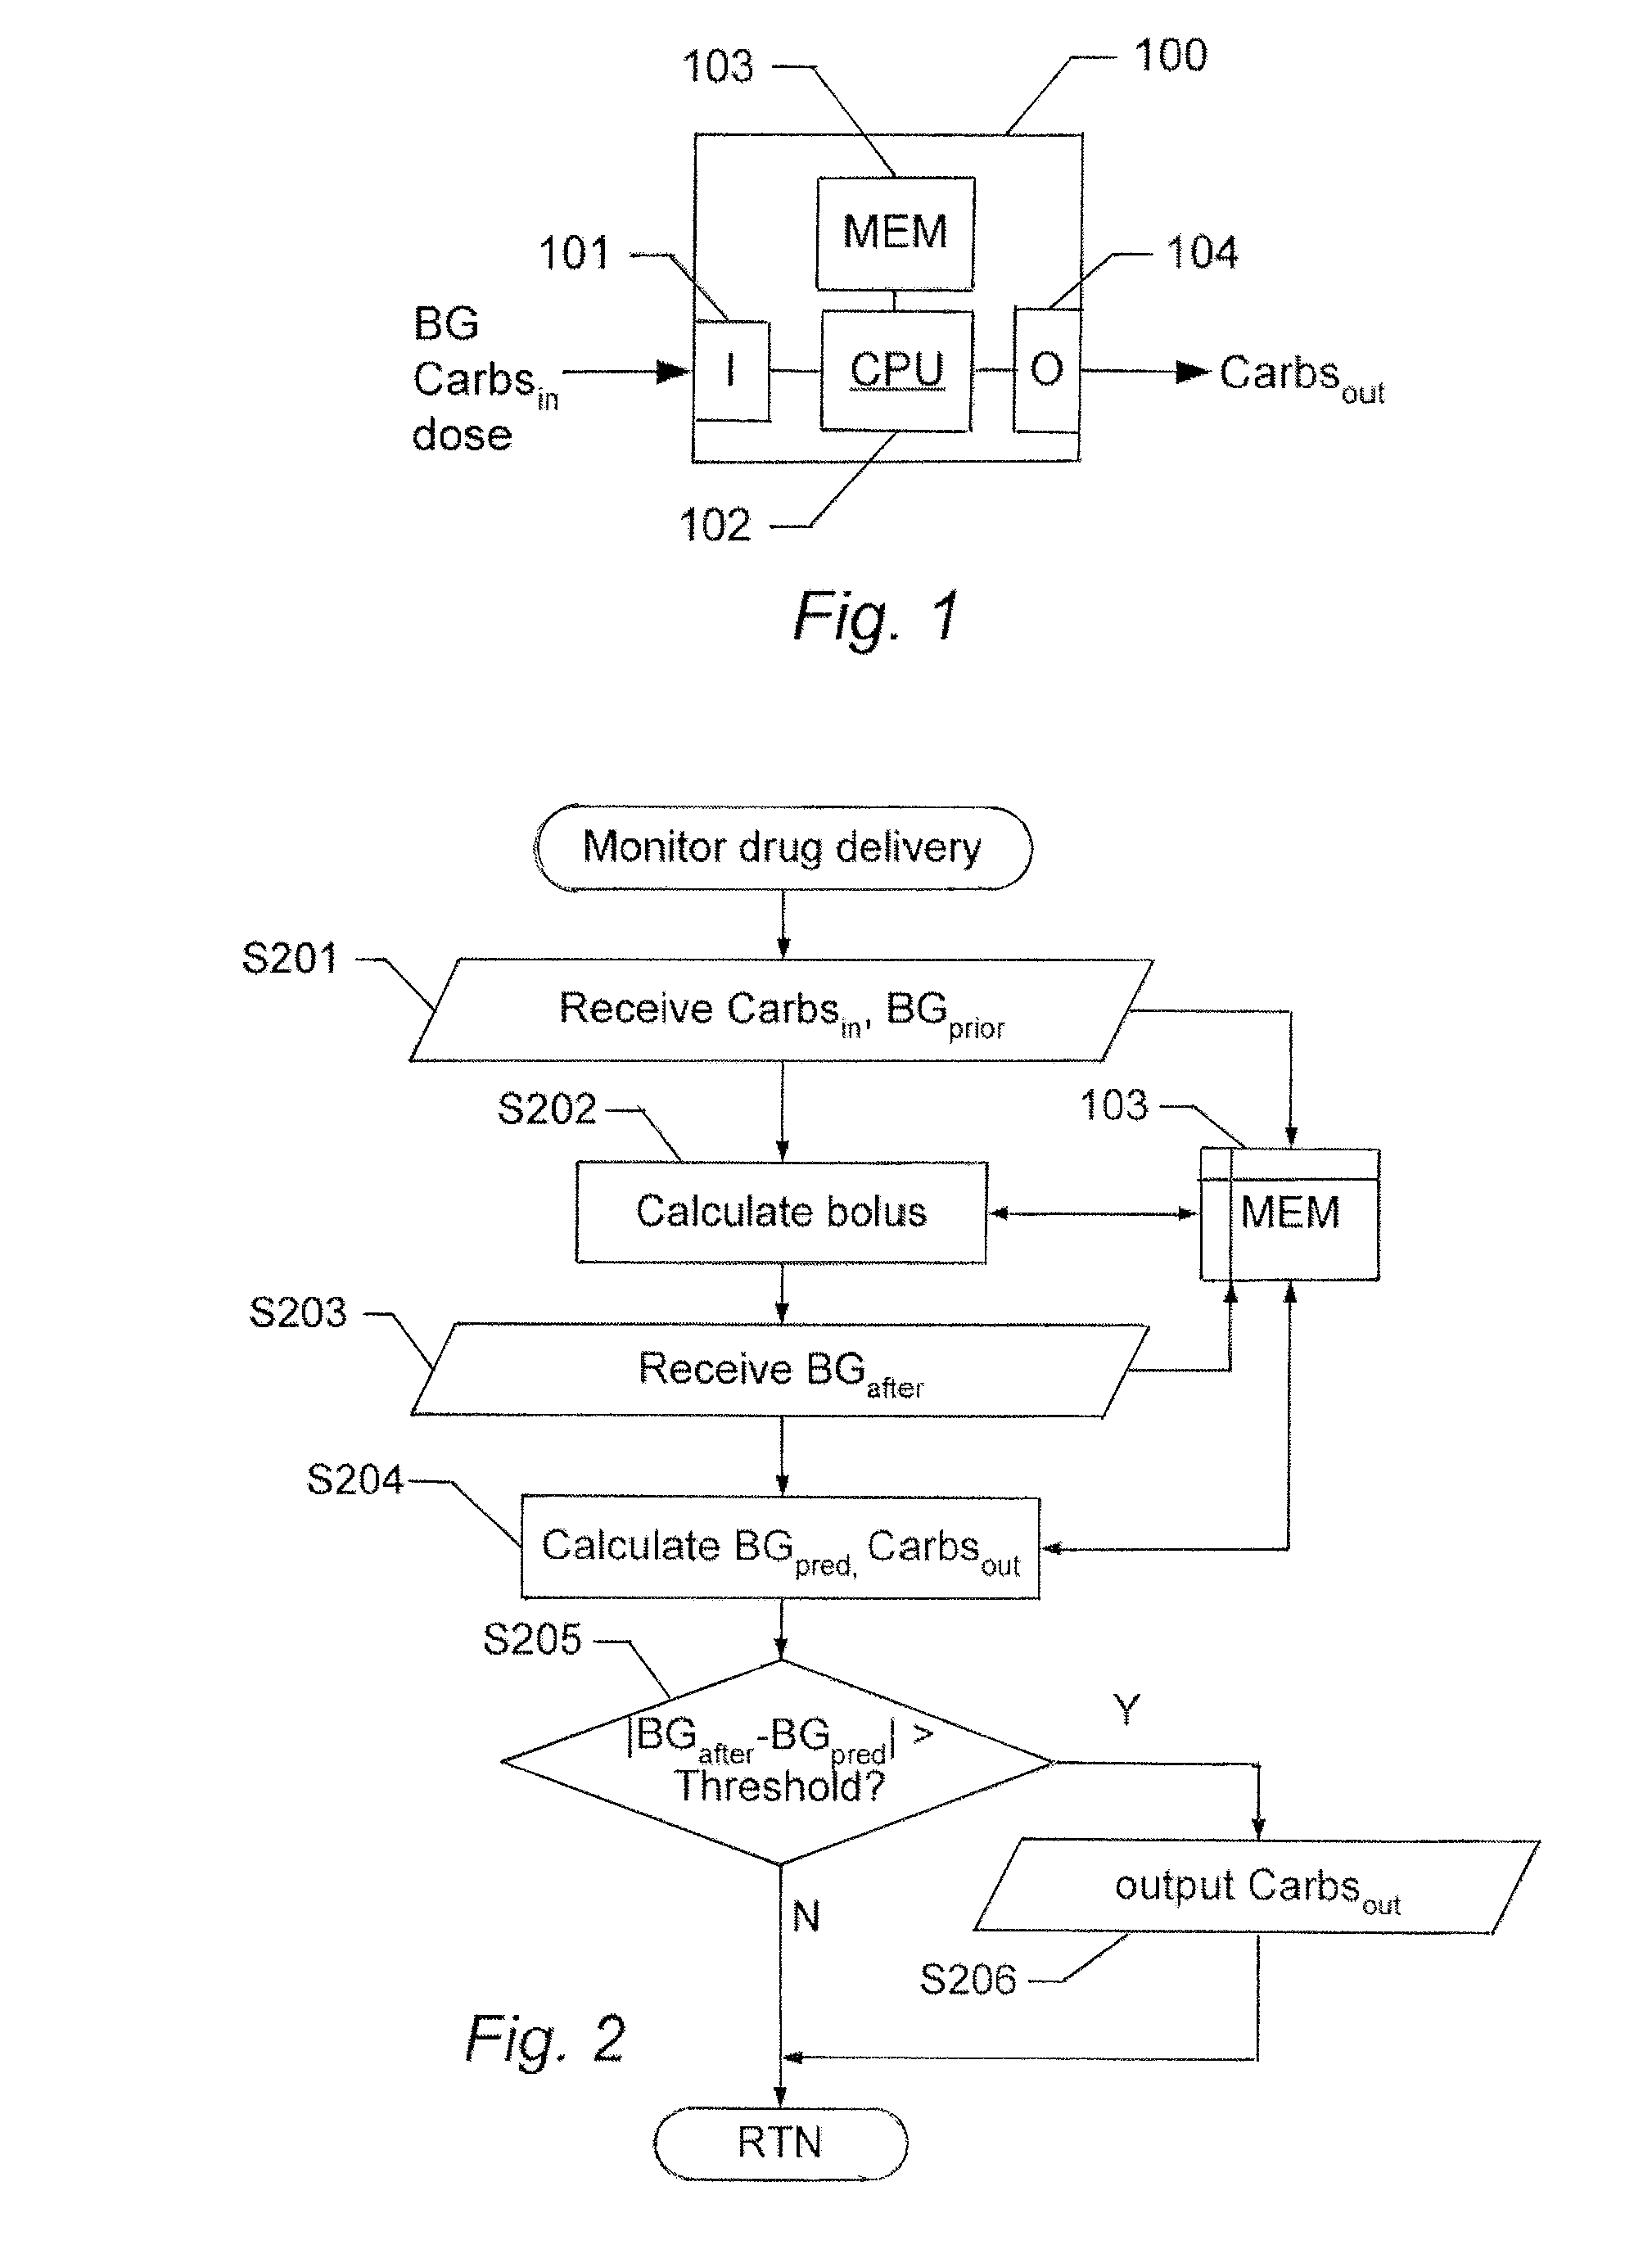 Estimating a nutritional parameter for assisting insulin administration